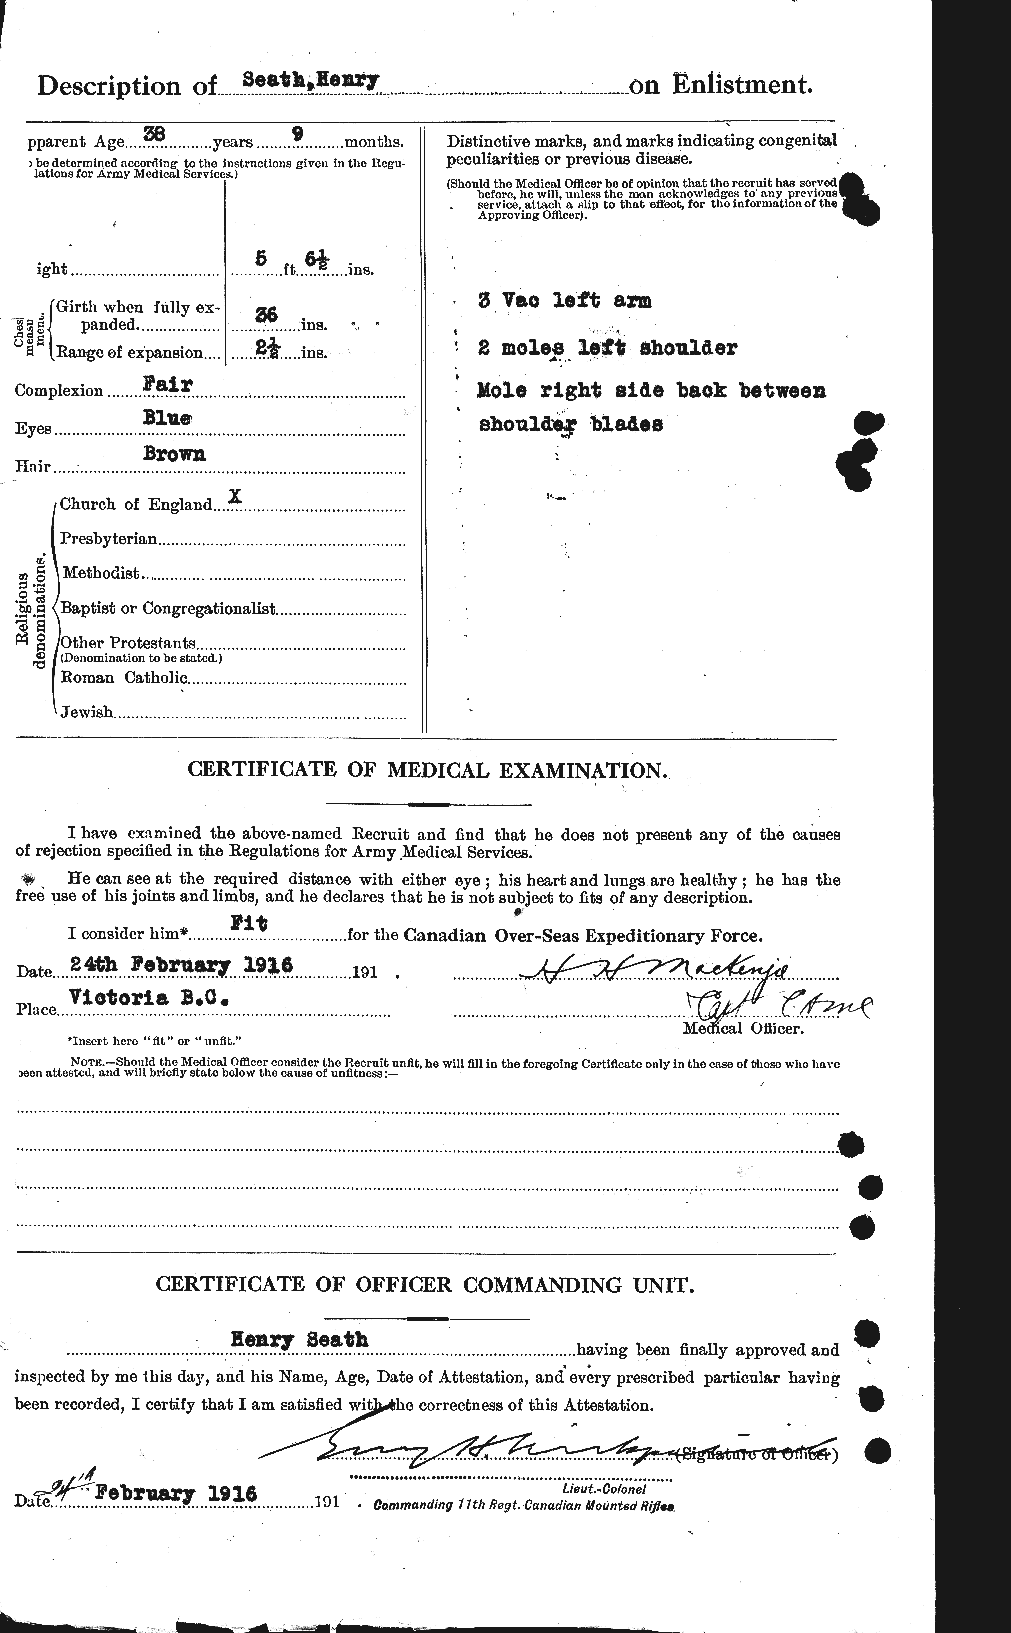 Personnel Records of the First World War - CEF 086379b